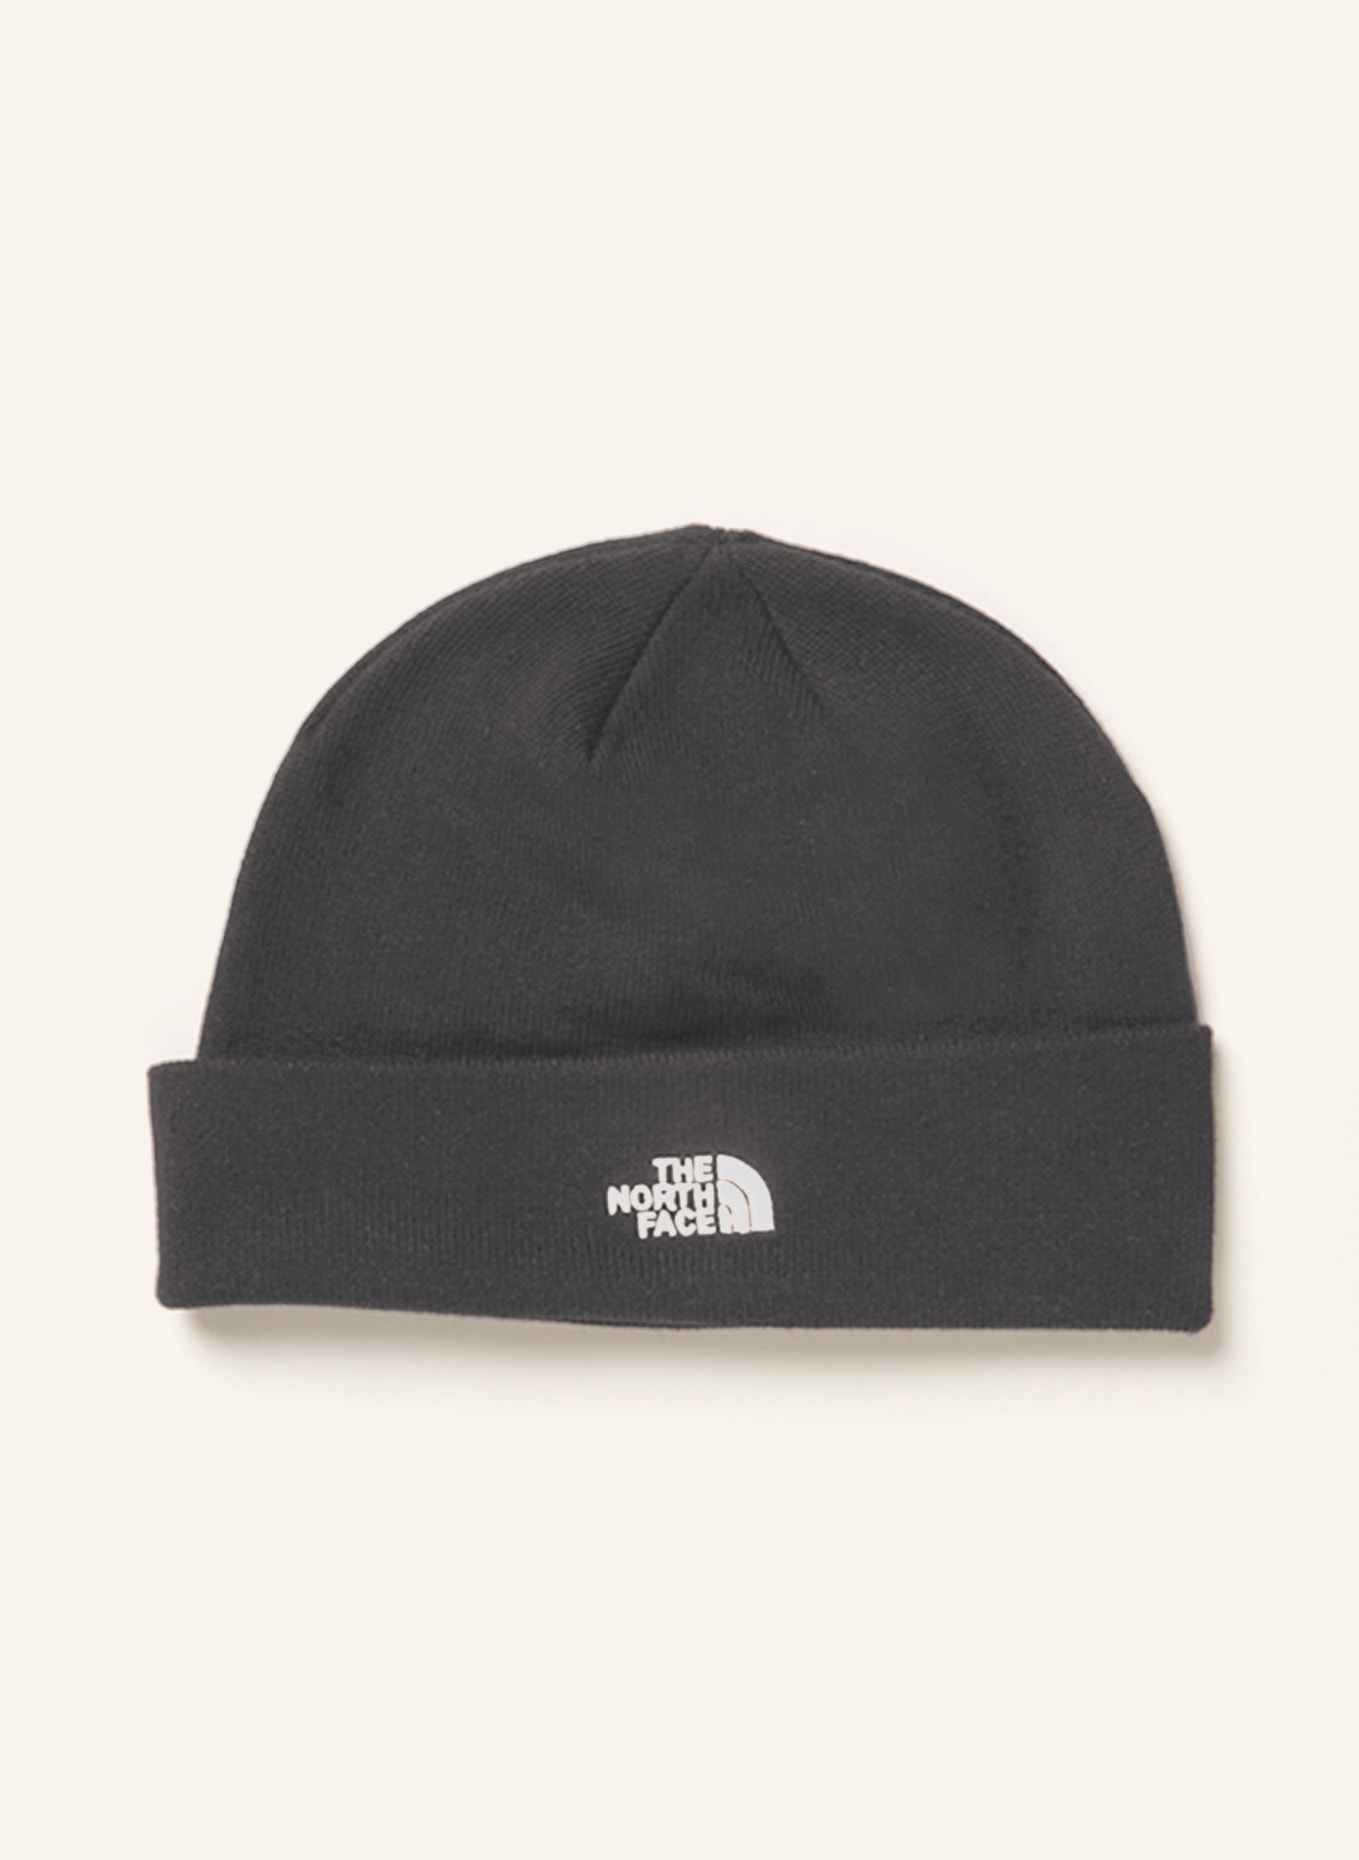 THE NORTH FACE Beanie, Color: BLACK (Image 1)